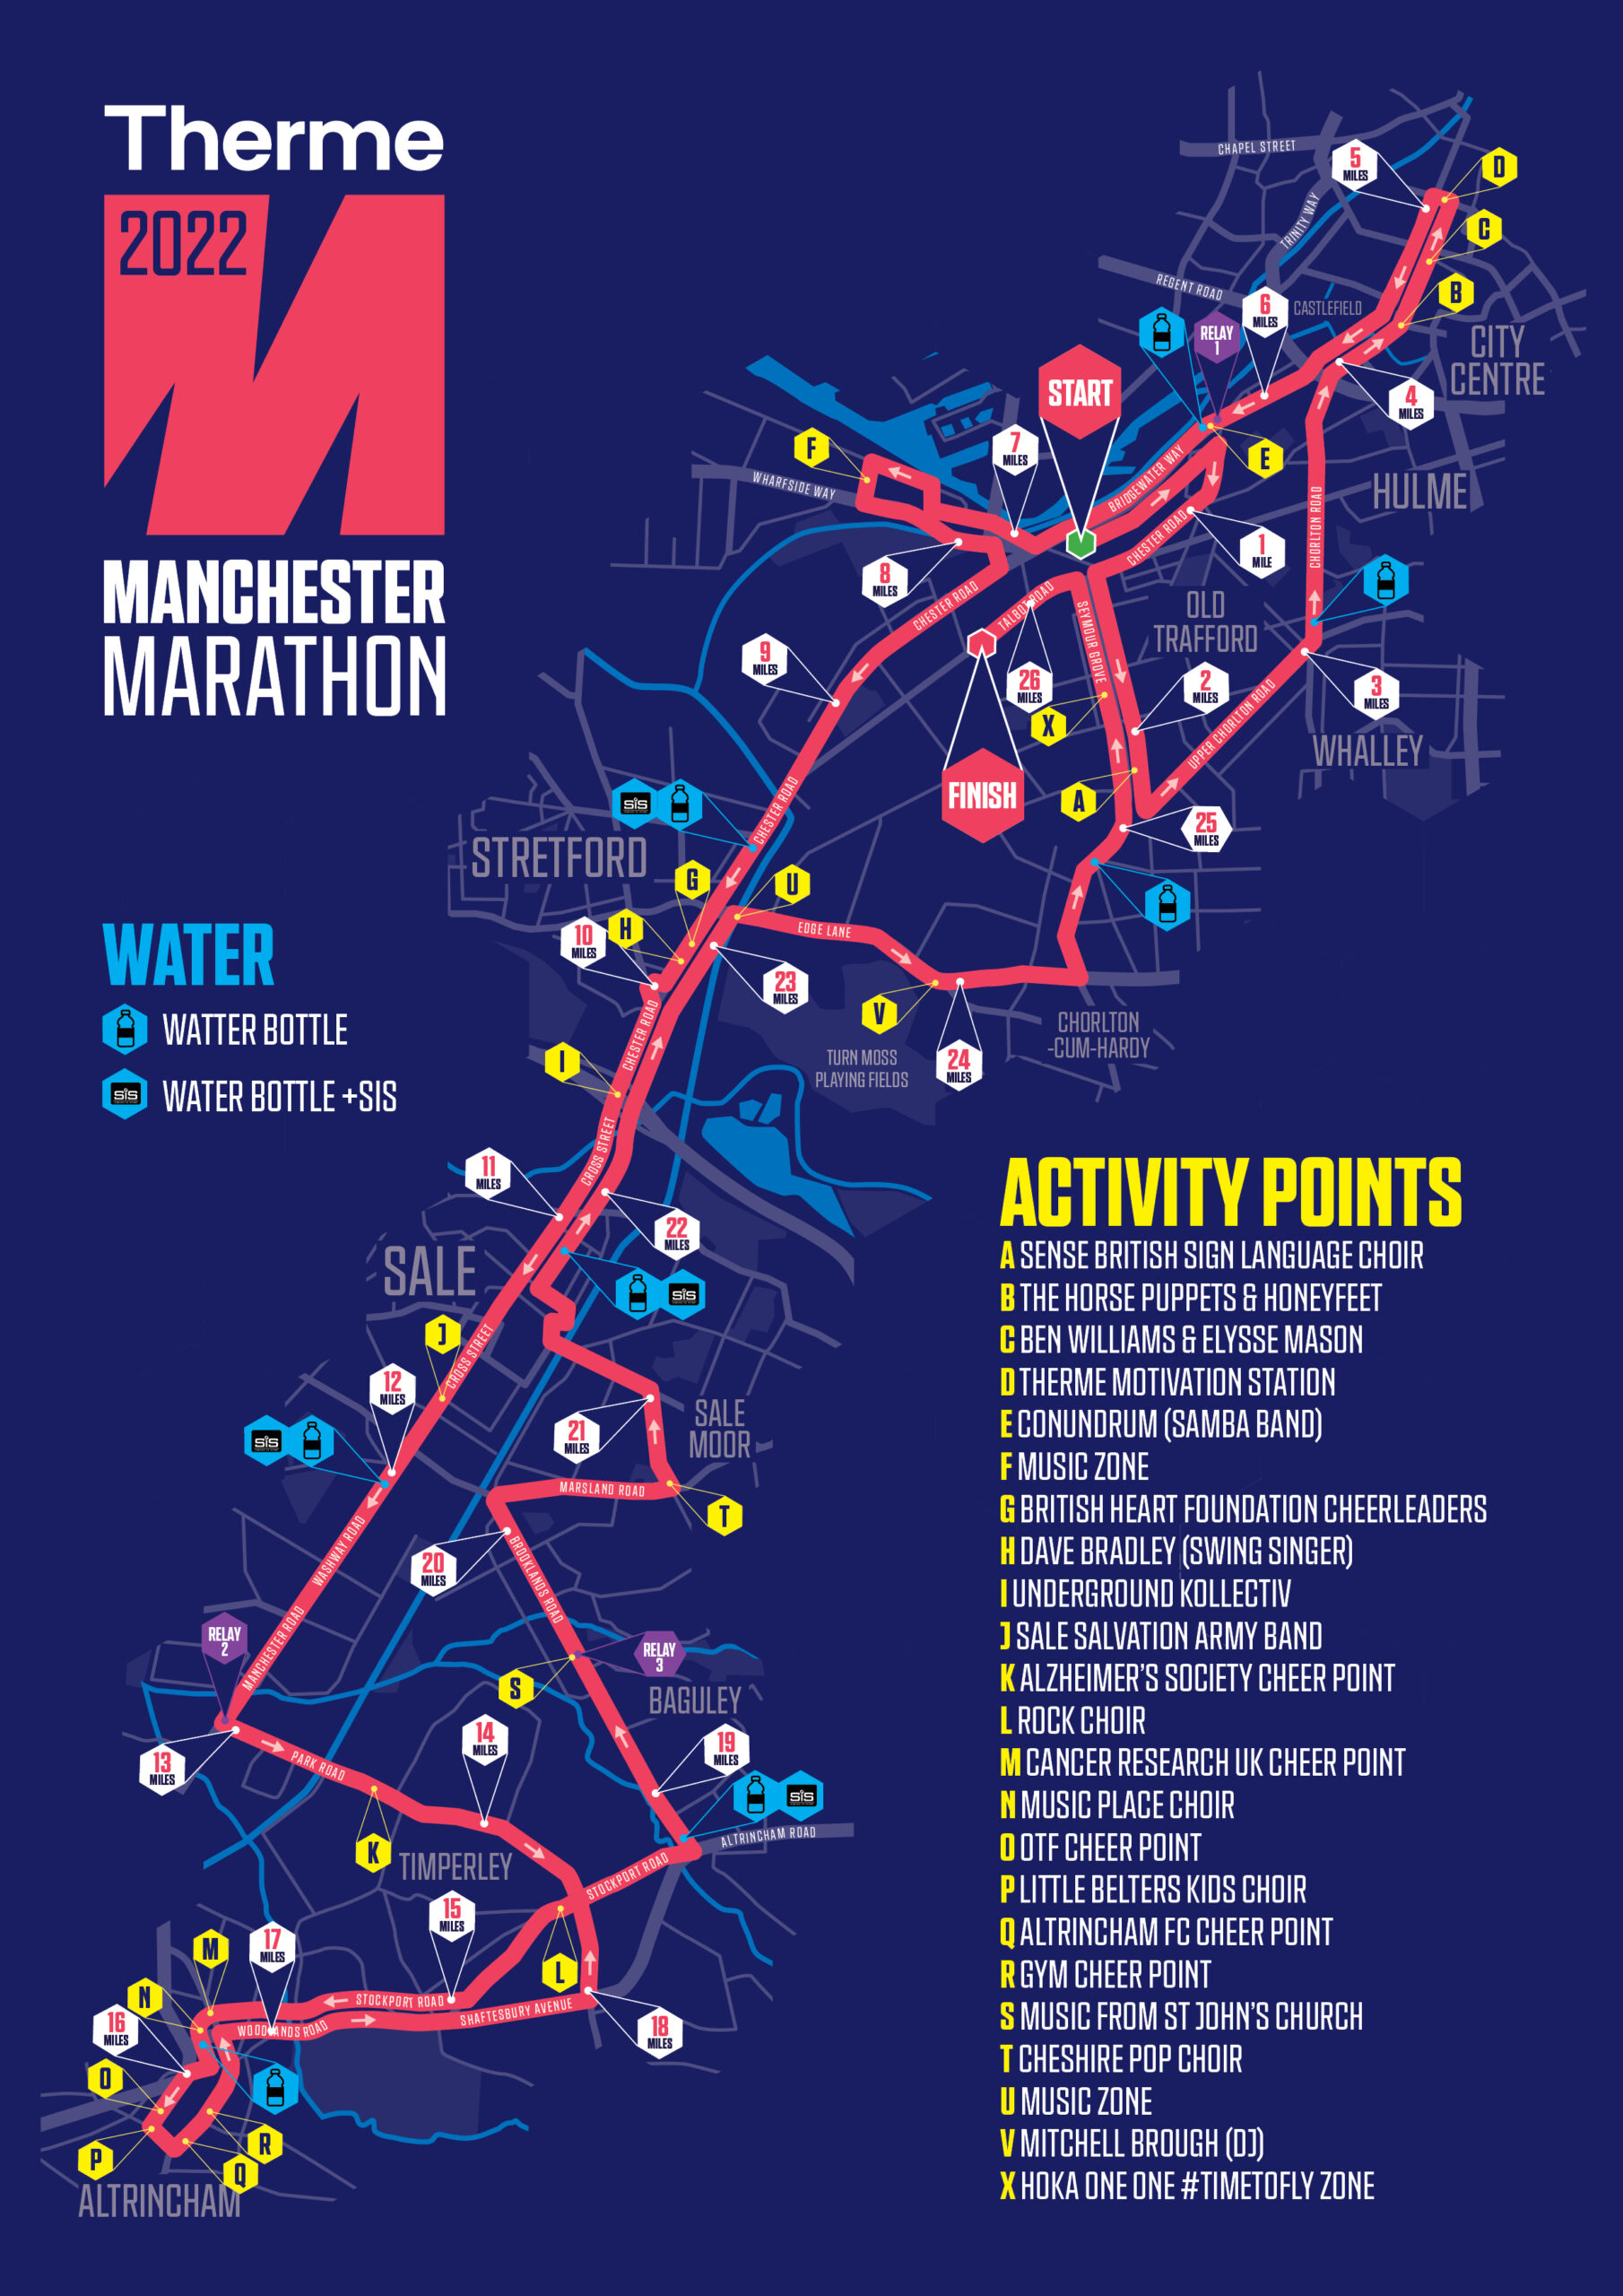 Manchester Marathon 2022 - road closures, route map, and post-run pints